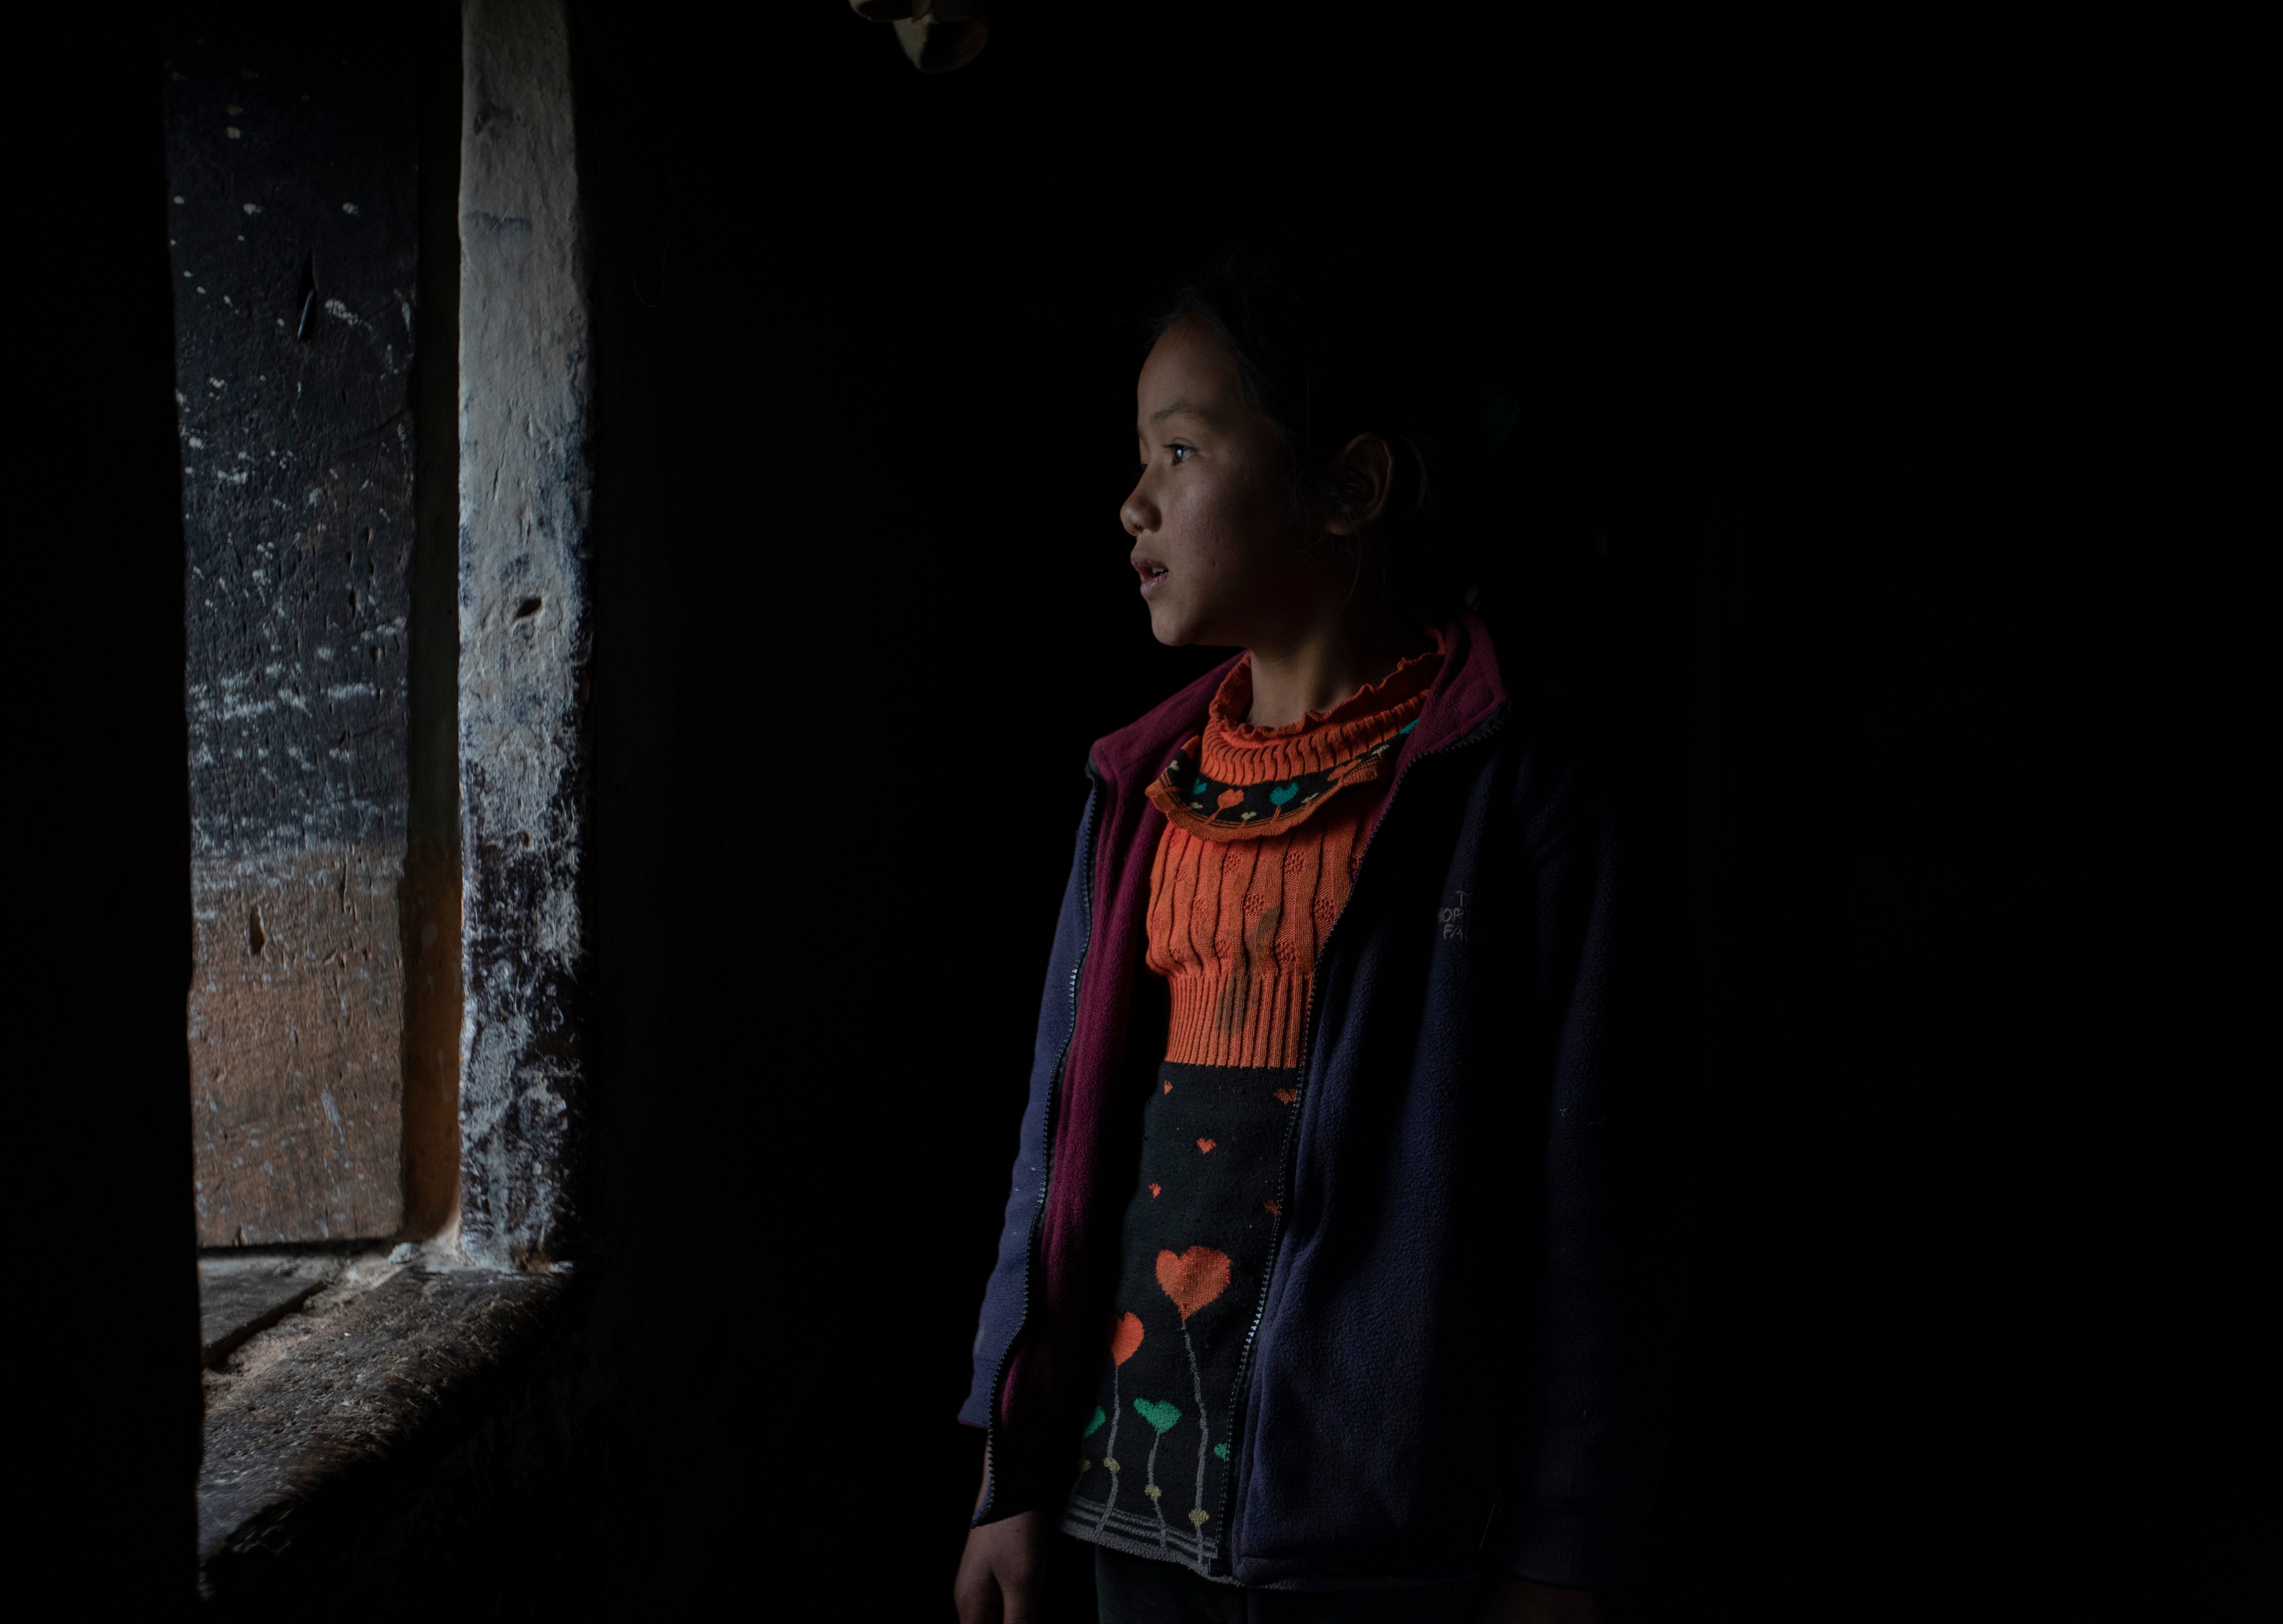 Heena, 10, lives inthe small mountainous village of Sedangfung in Nepal and has never been to school. “I wonder what it feels like to be in a classroom wearing a school uniform. I’ve heard that teachers give special care to their students. I wish to see and experience all that.”